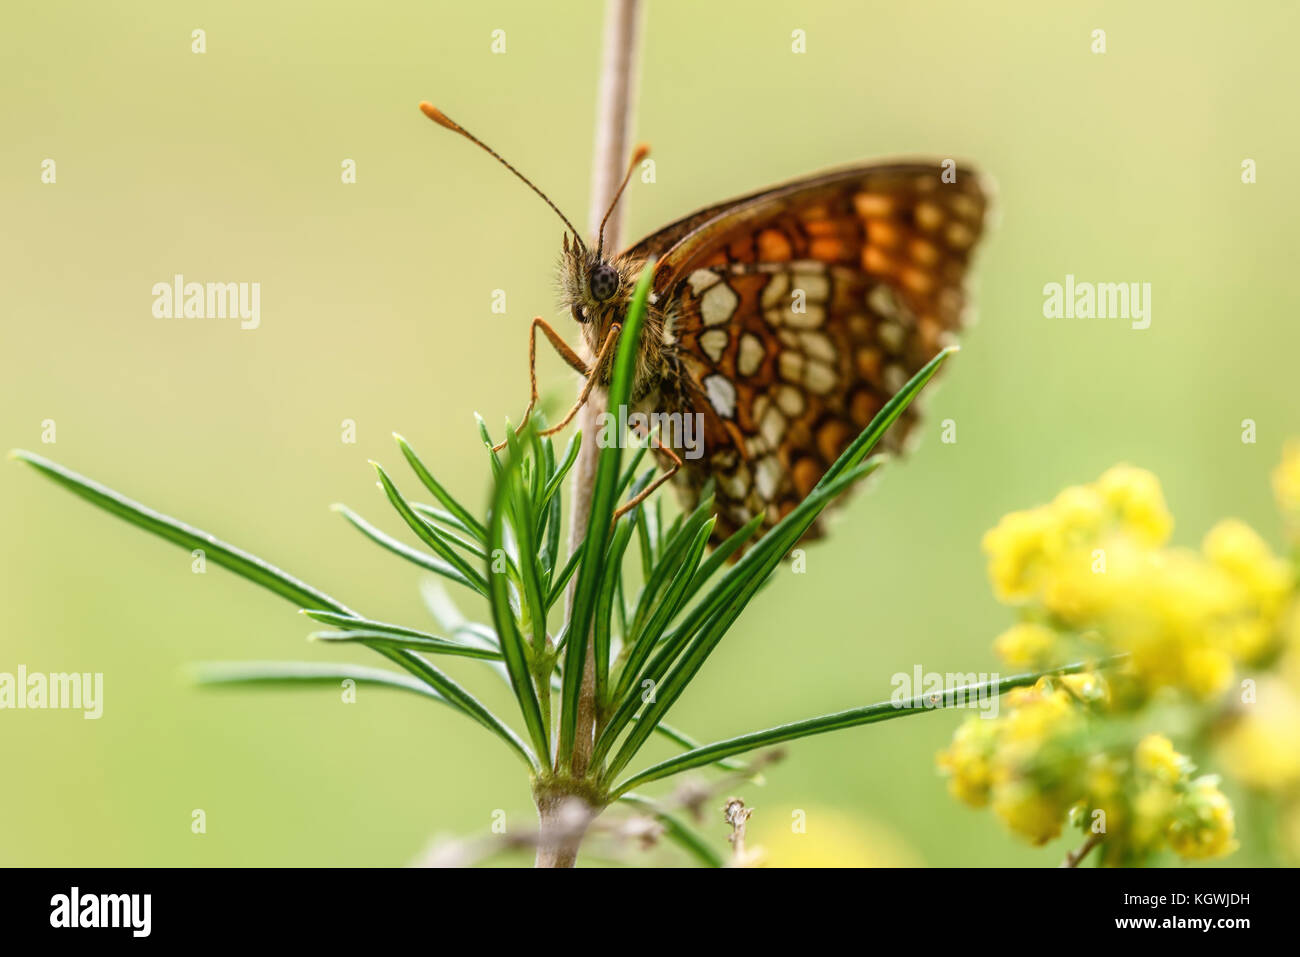 Beautiful natural background with butterfly closeup with orange spots sitting on a branch on the blurred background of green grass Stock Photo